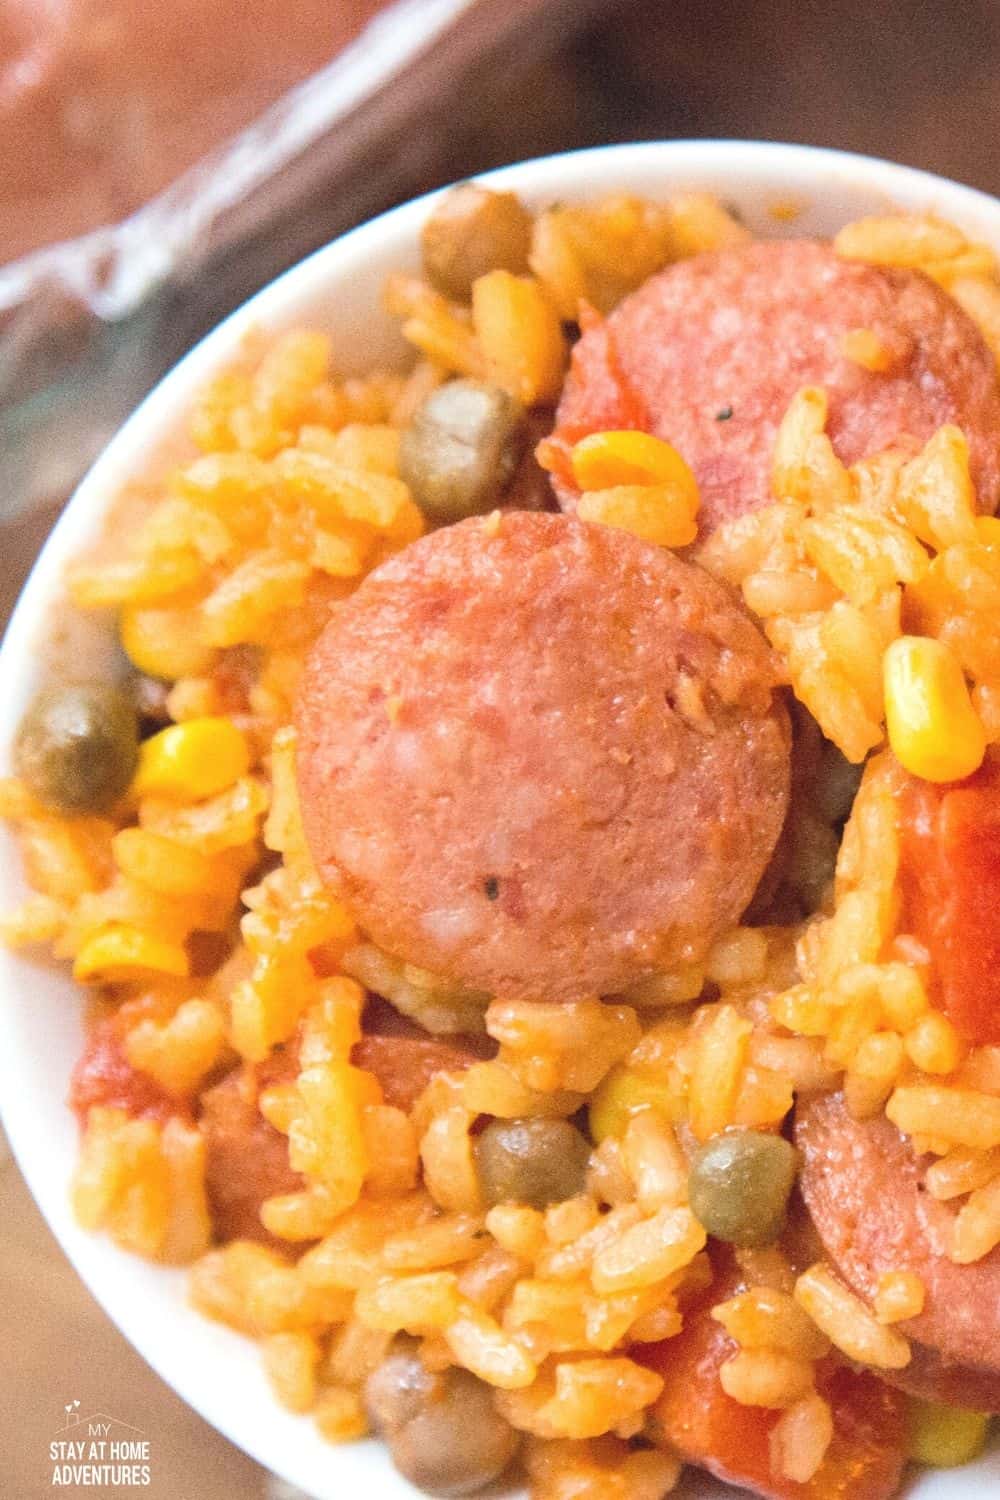 Learn how to make Sausage with Puerto Rican rice with Pigeon peas using an Instant Pot or electric pressure cooker. #puertoricanfood #seasonedrice #instantpotrecipe via @mystayathome